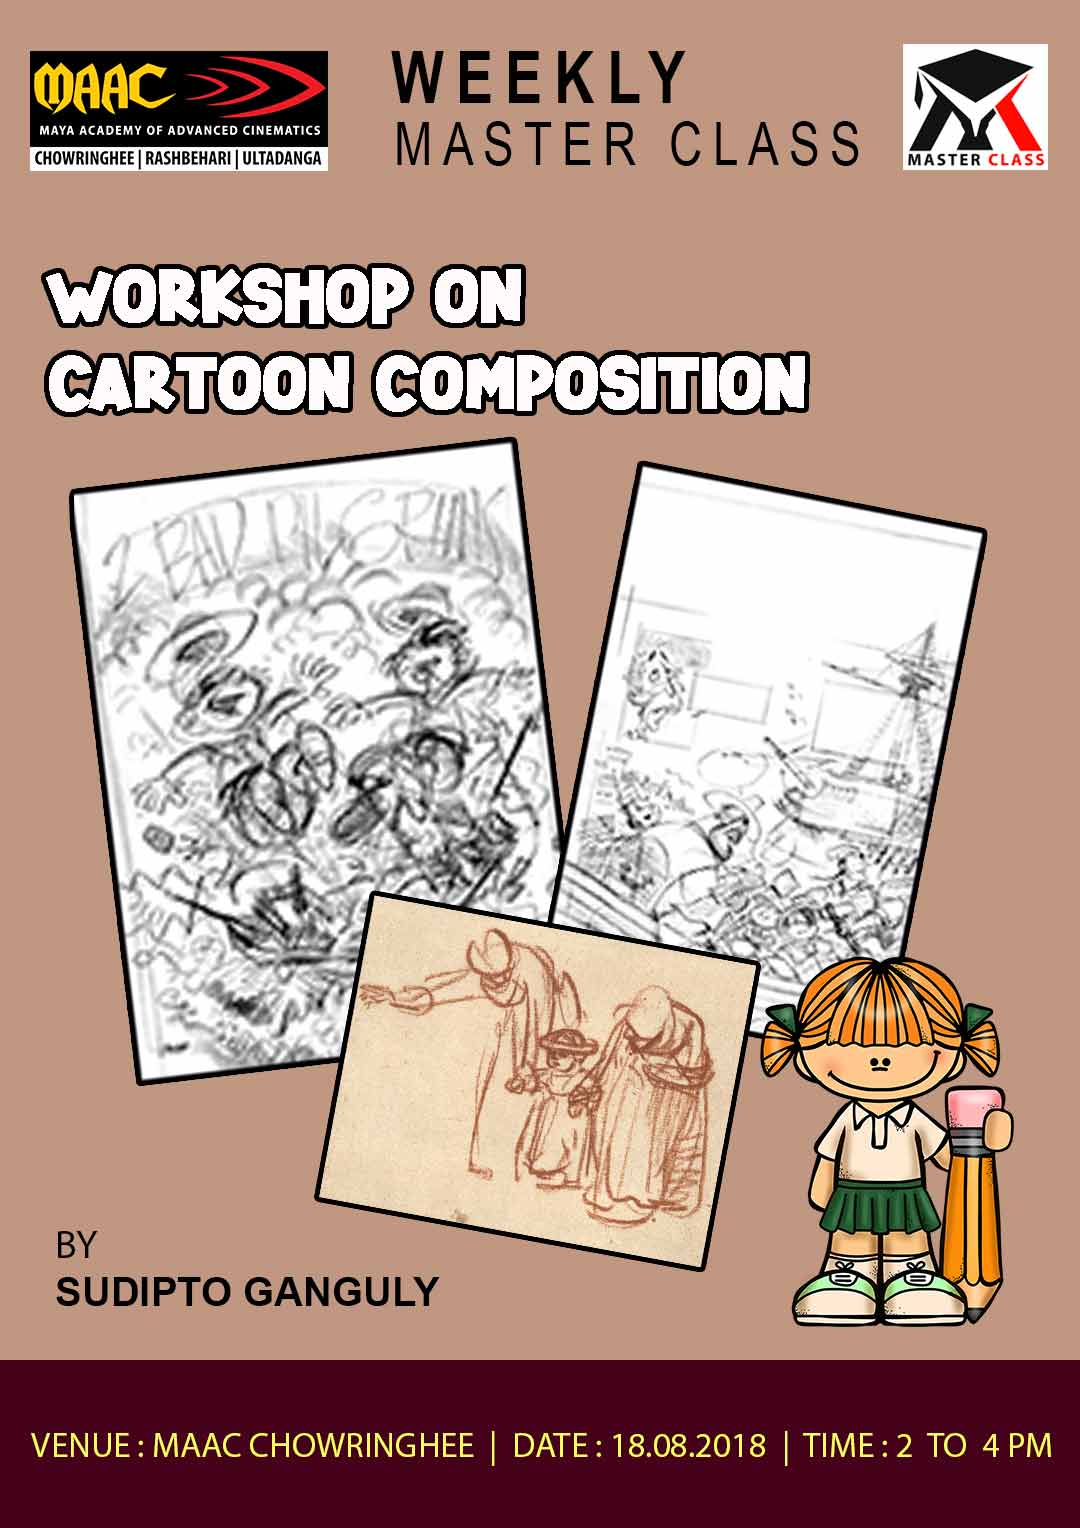 Weekly Master Class on Workshop On Cartoon Composition